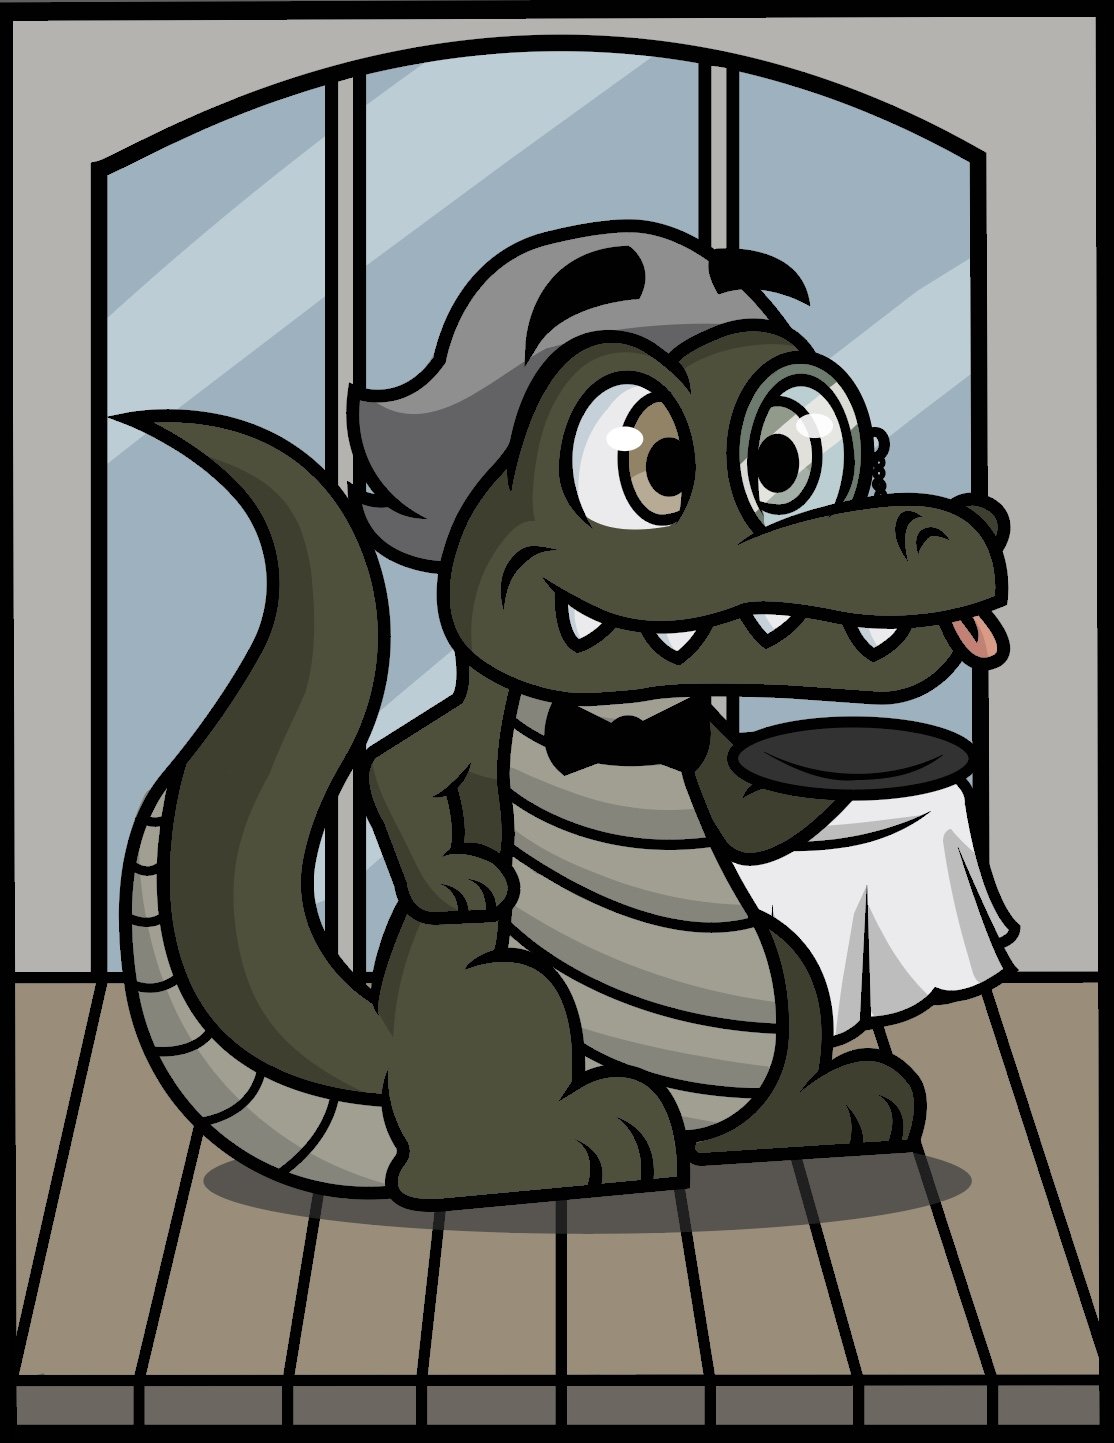 Waiter Gator - alligator with grey hair, monocle, bow tie, and serving tray with a derpy expression